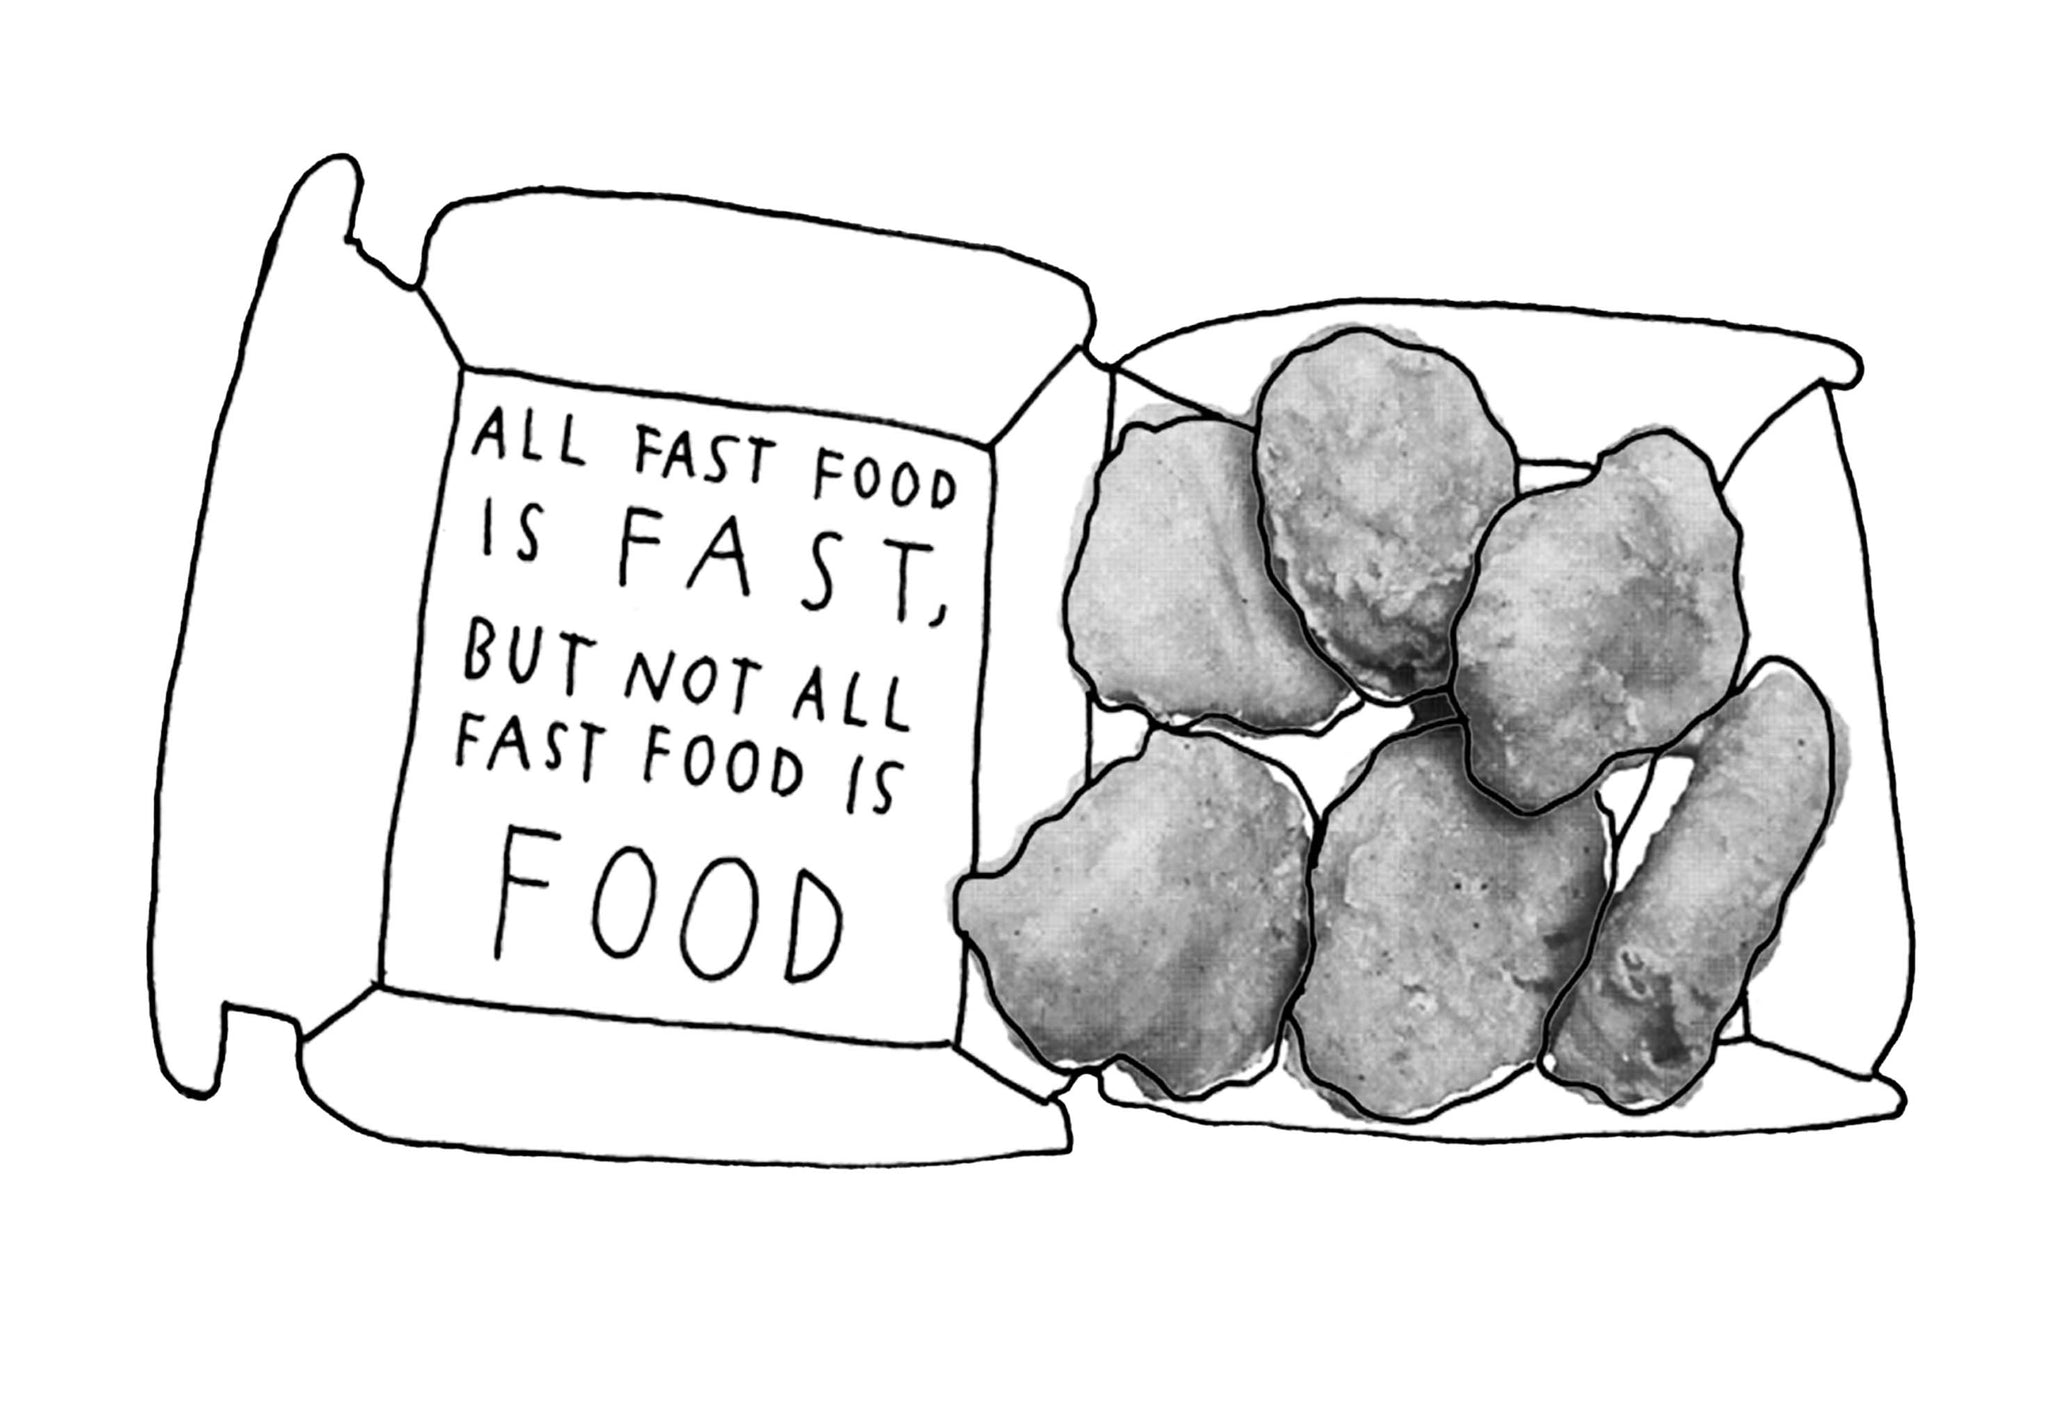 All Fast Food is Fast But Not All Fast Food is Food (Archival Print)